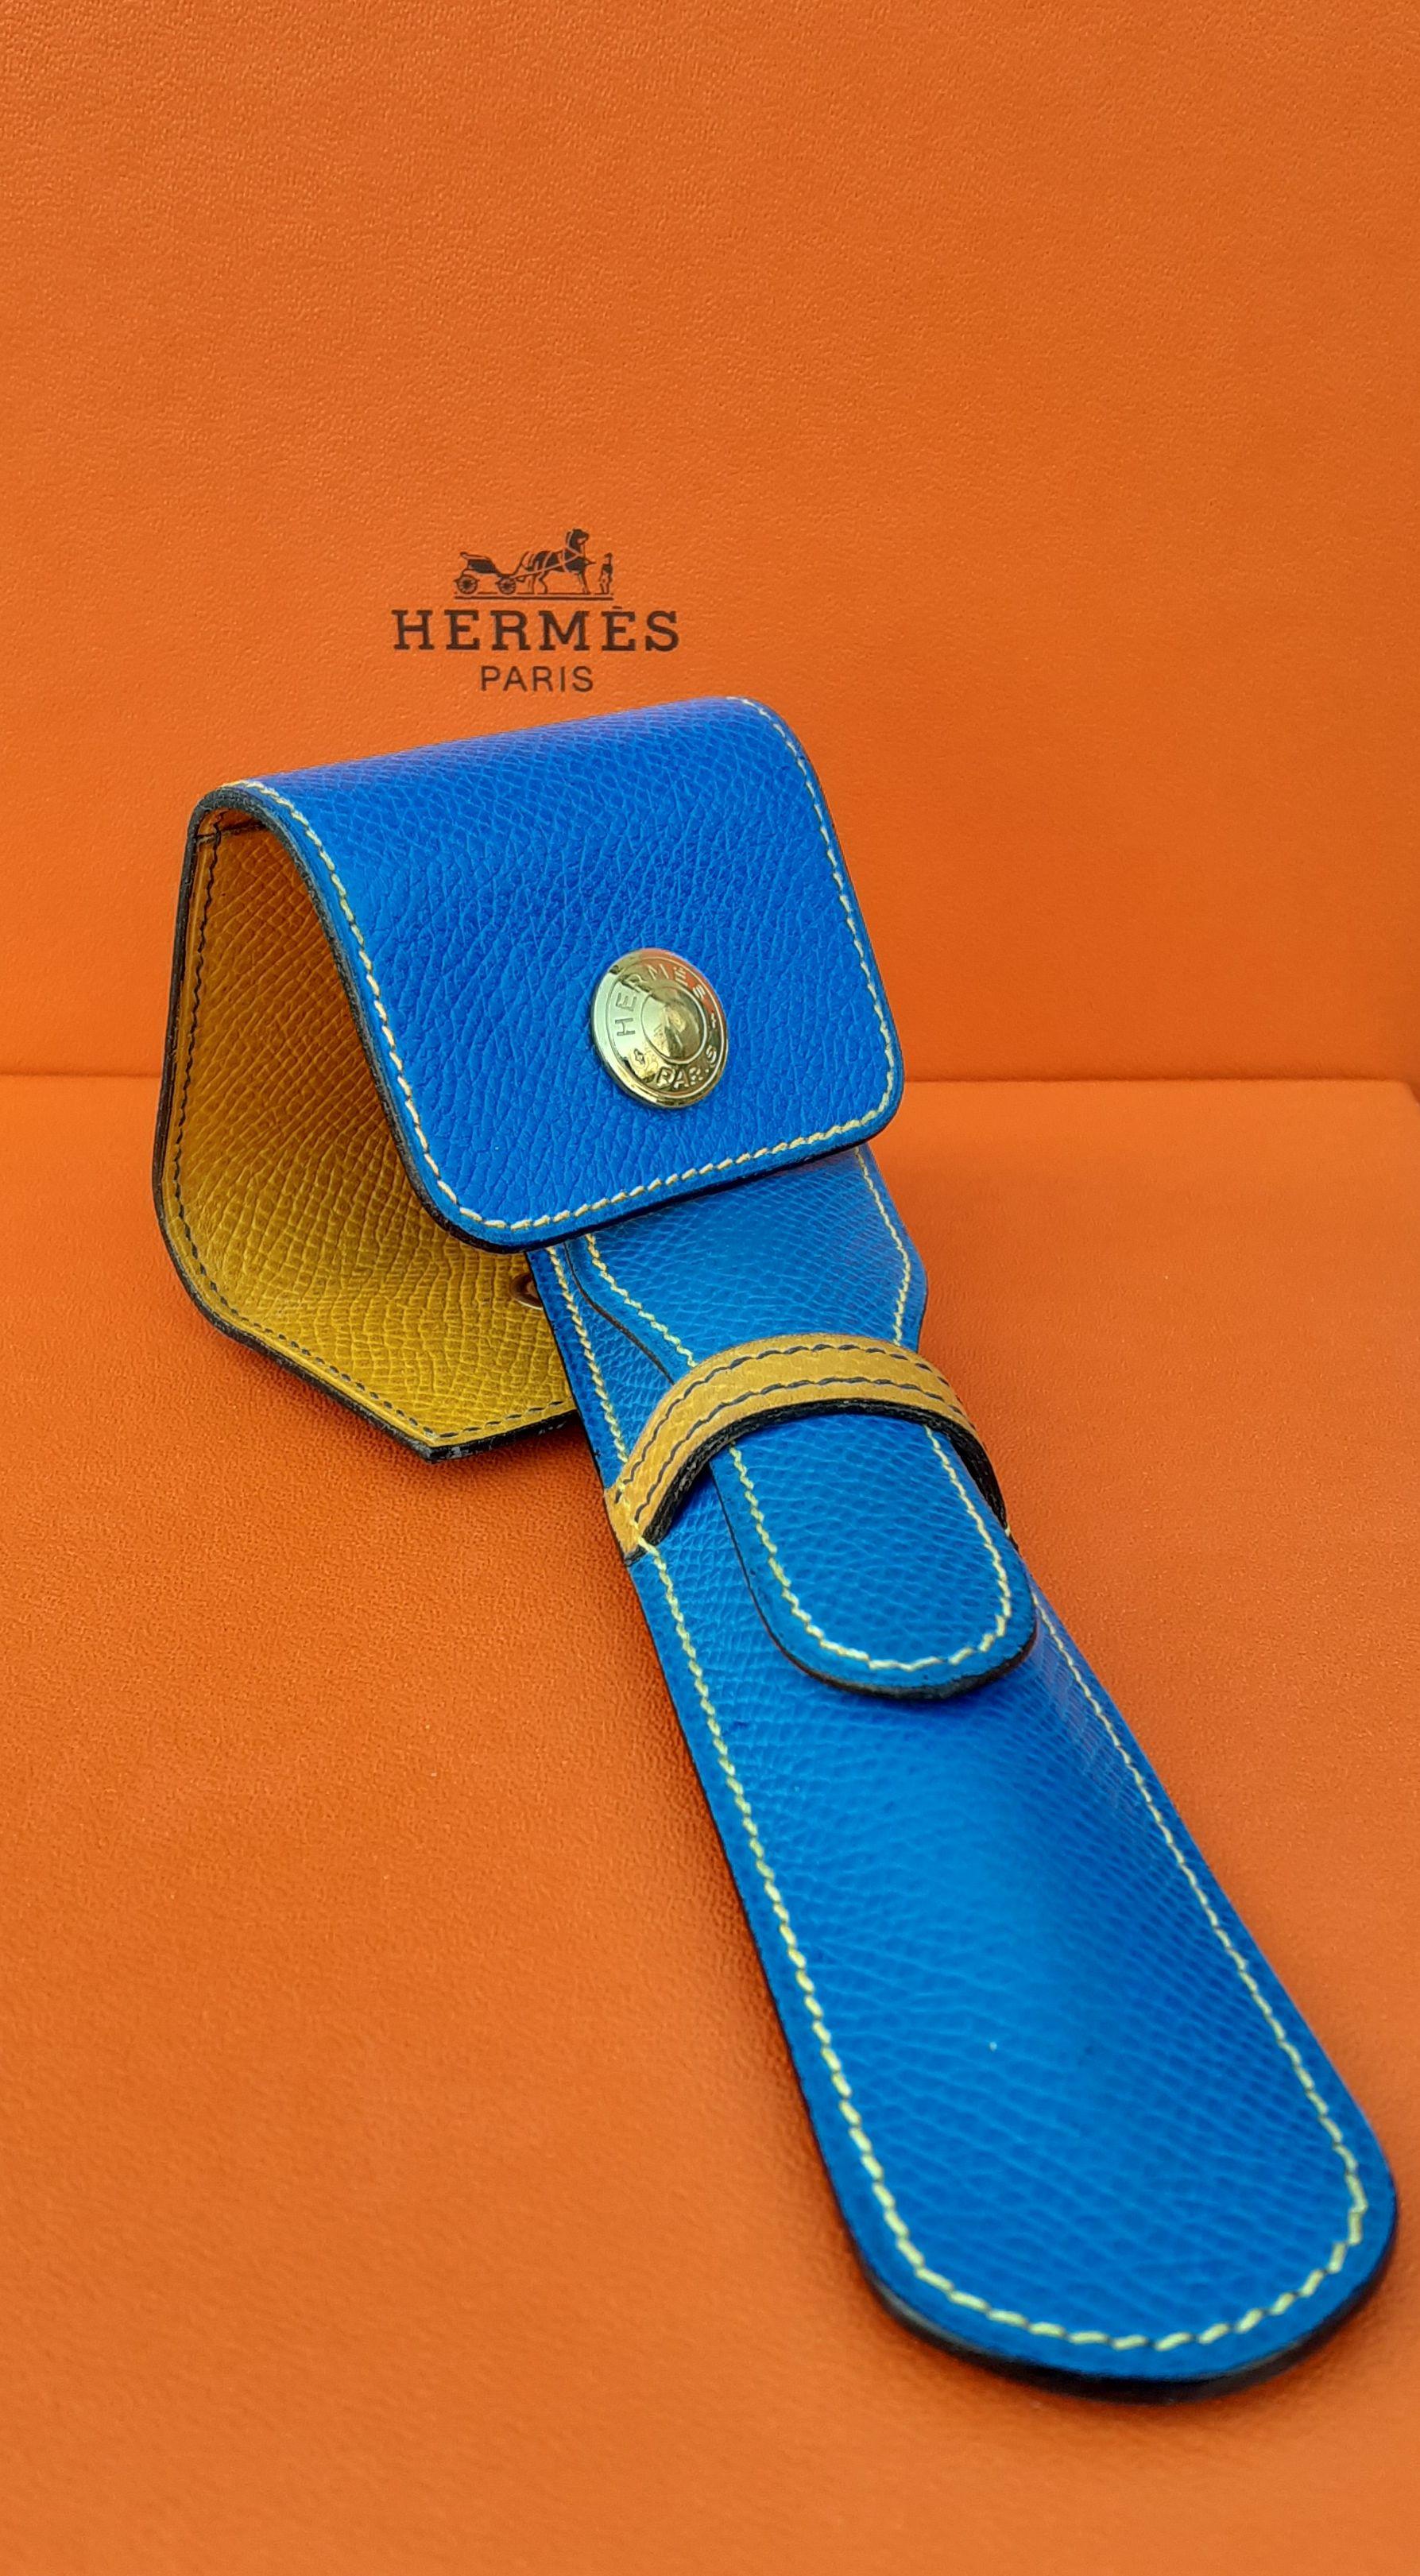 Rare and Beautiful Authentic Hermès Set

2 pieces: 1 pencil case and 1 sticky notes cover

Vintage / Stamp T in circle (1990) in the pencil case

Made of Courchevel (ex Epsom) Leather

Colorway: Blue, Yellow (the blue of the pencil case is a little